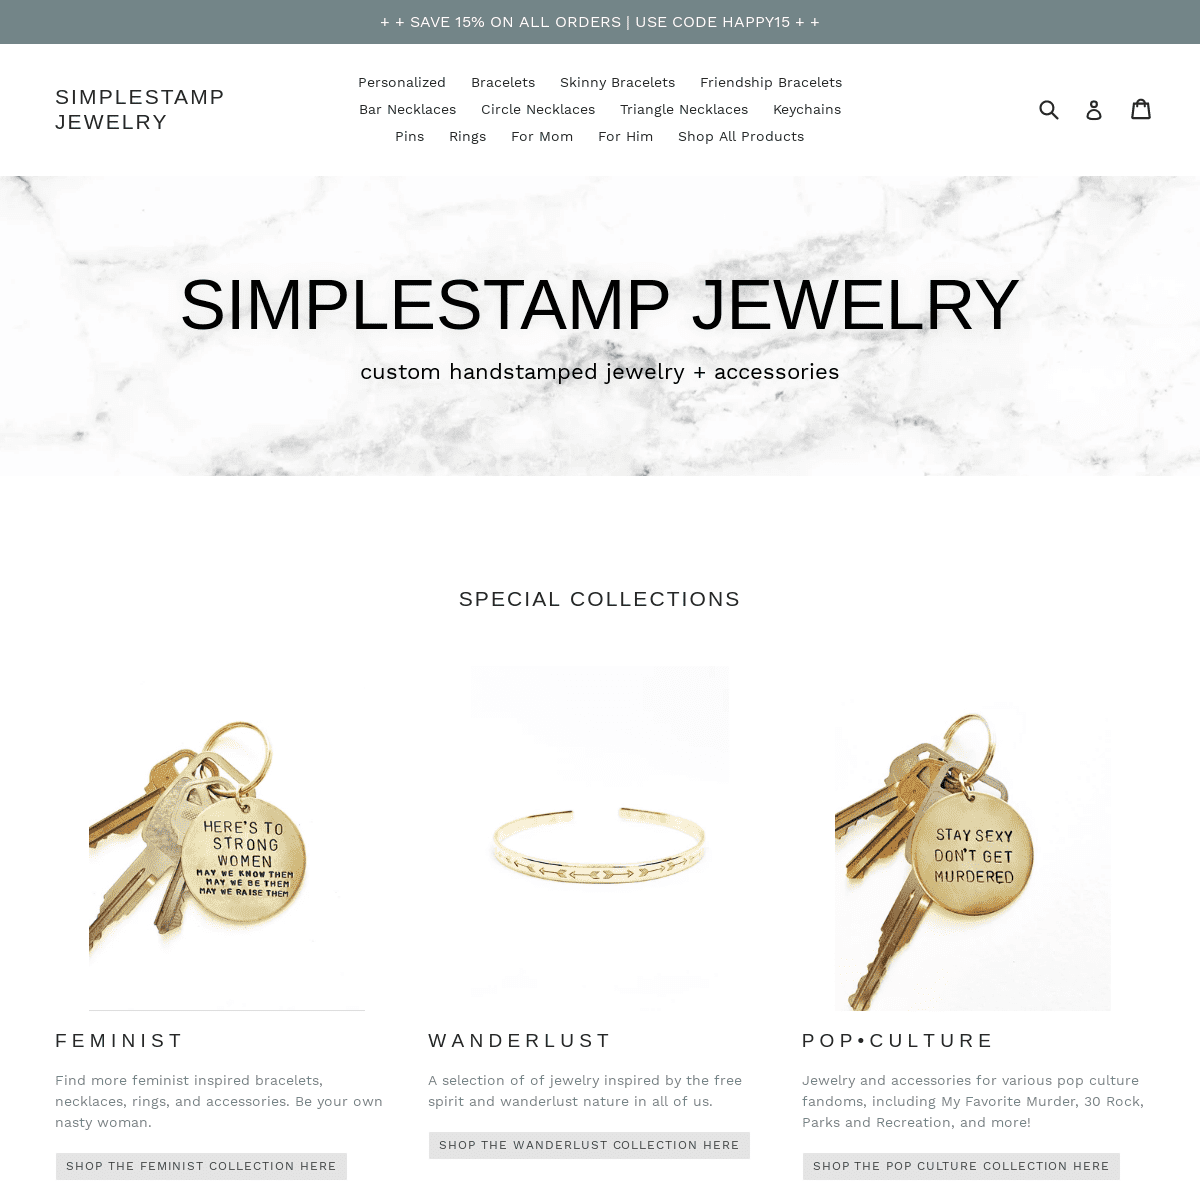 A complete backup of simplestampjewelry.com